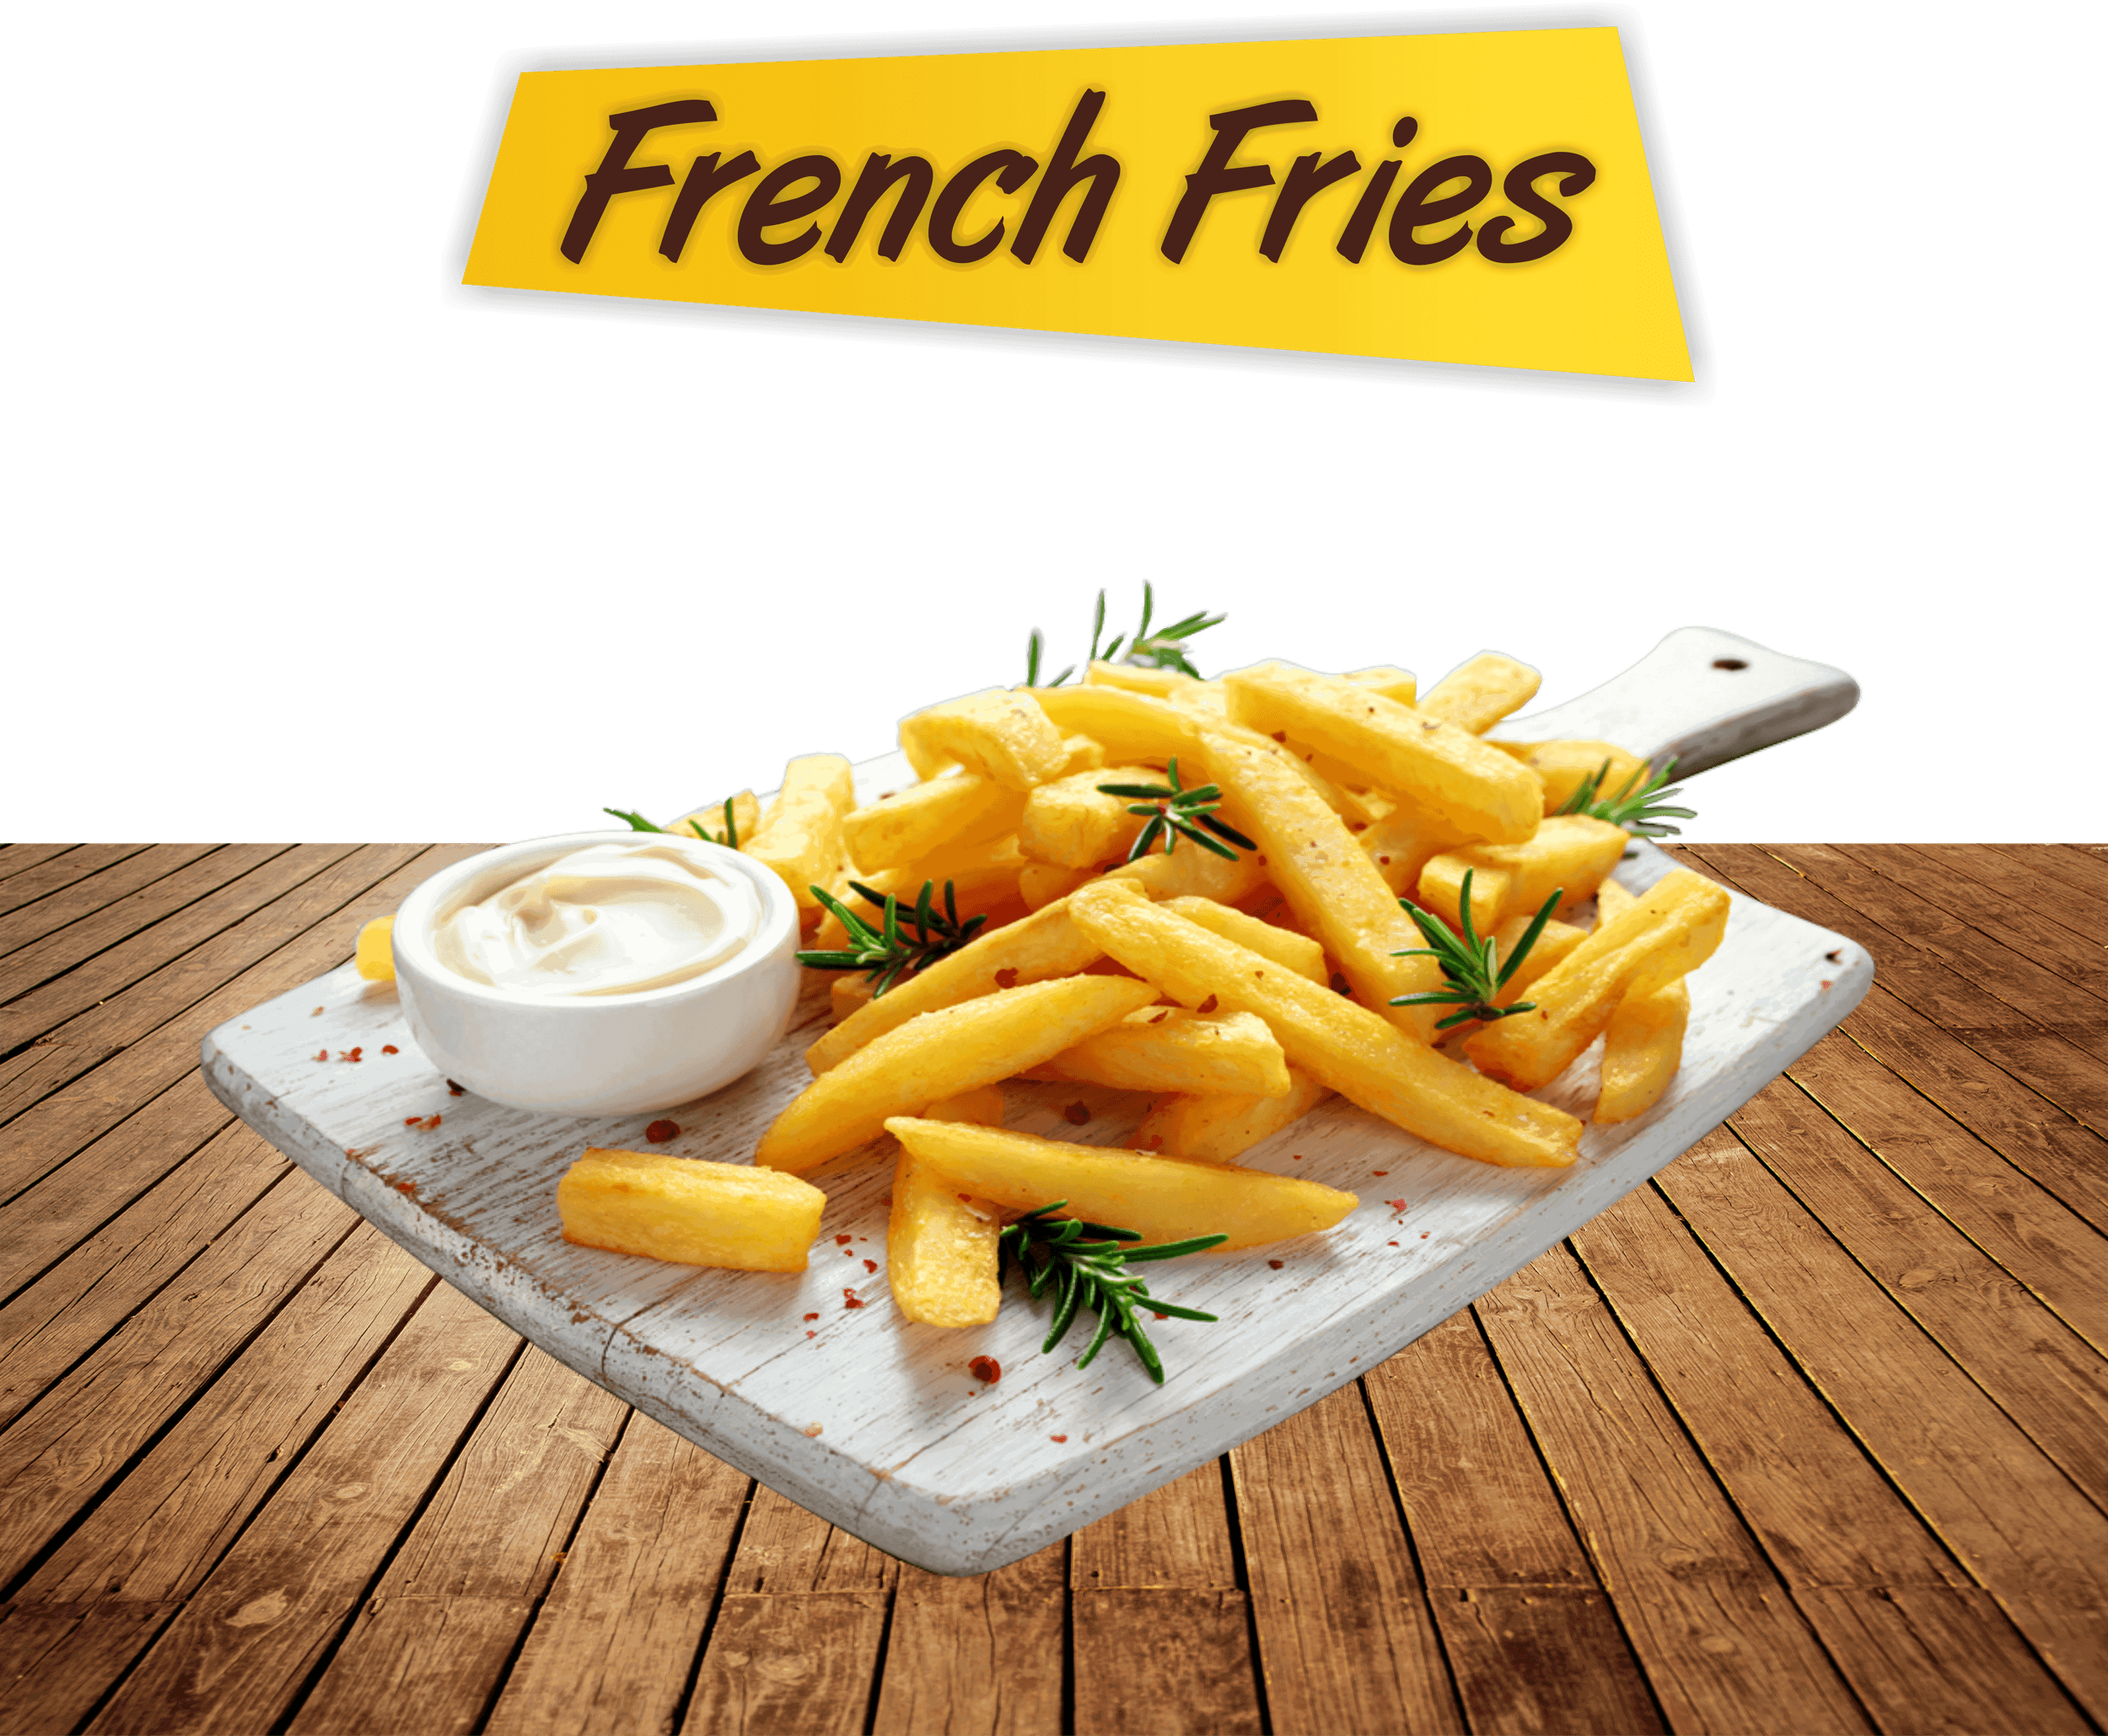 French Fries_11zon (1)